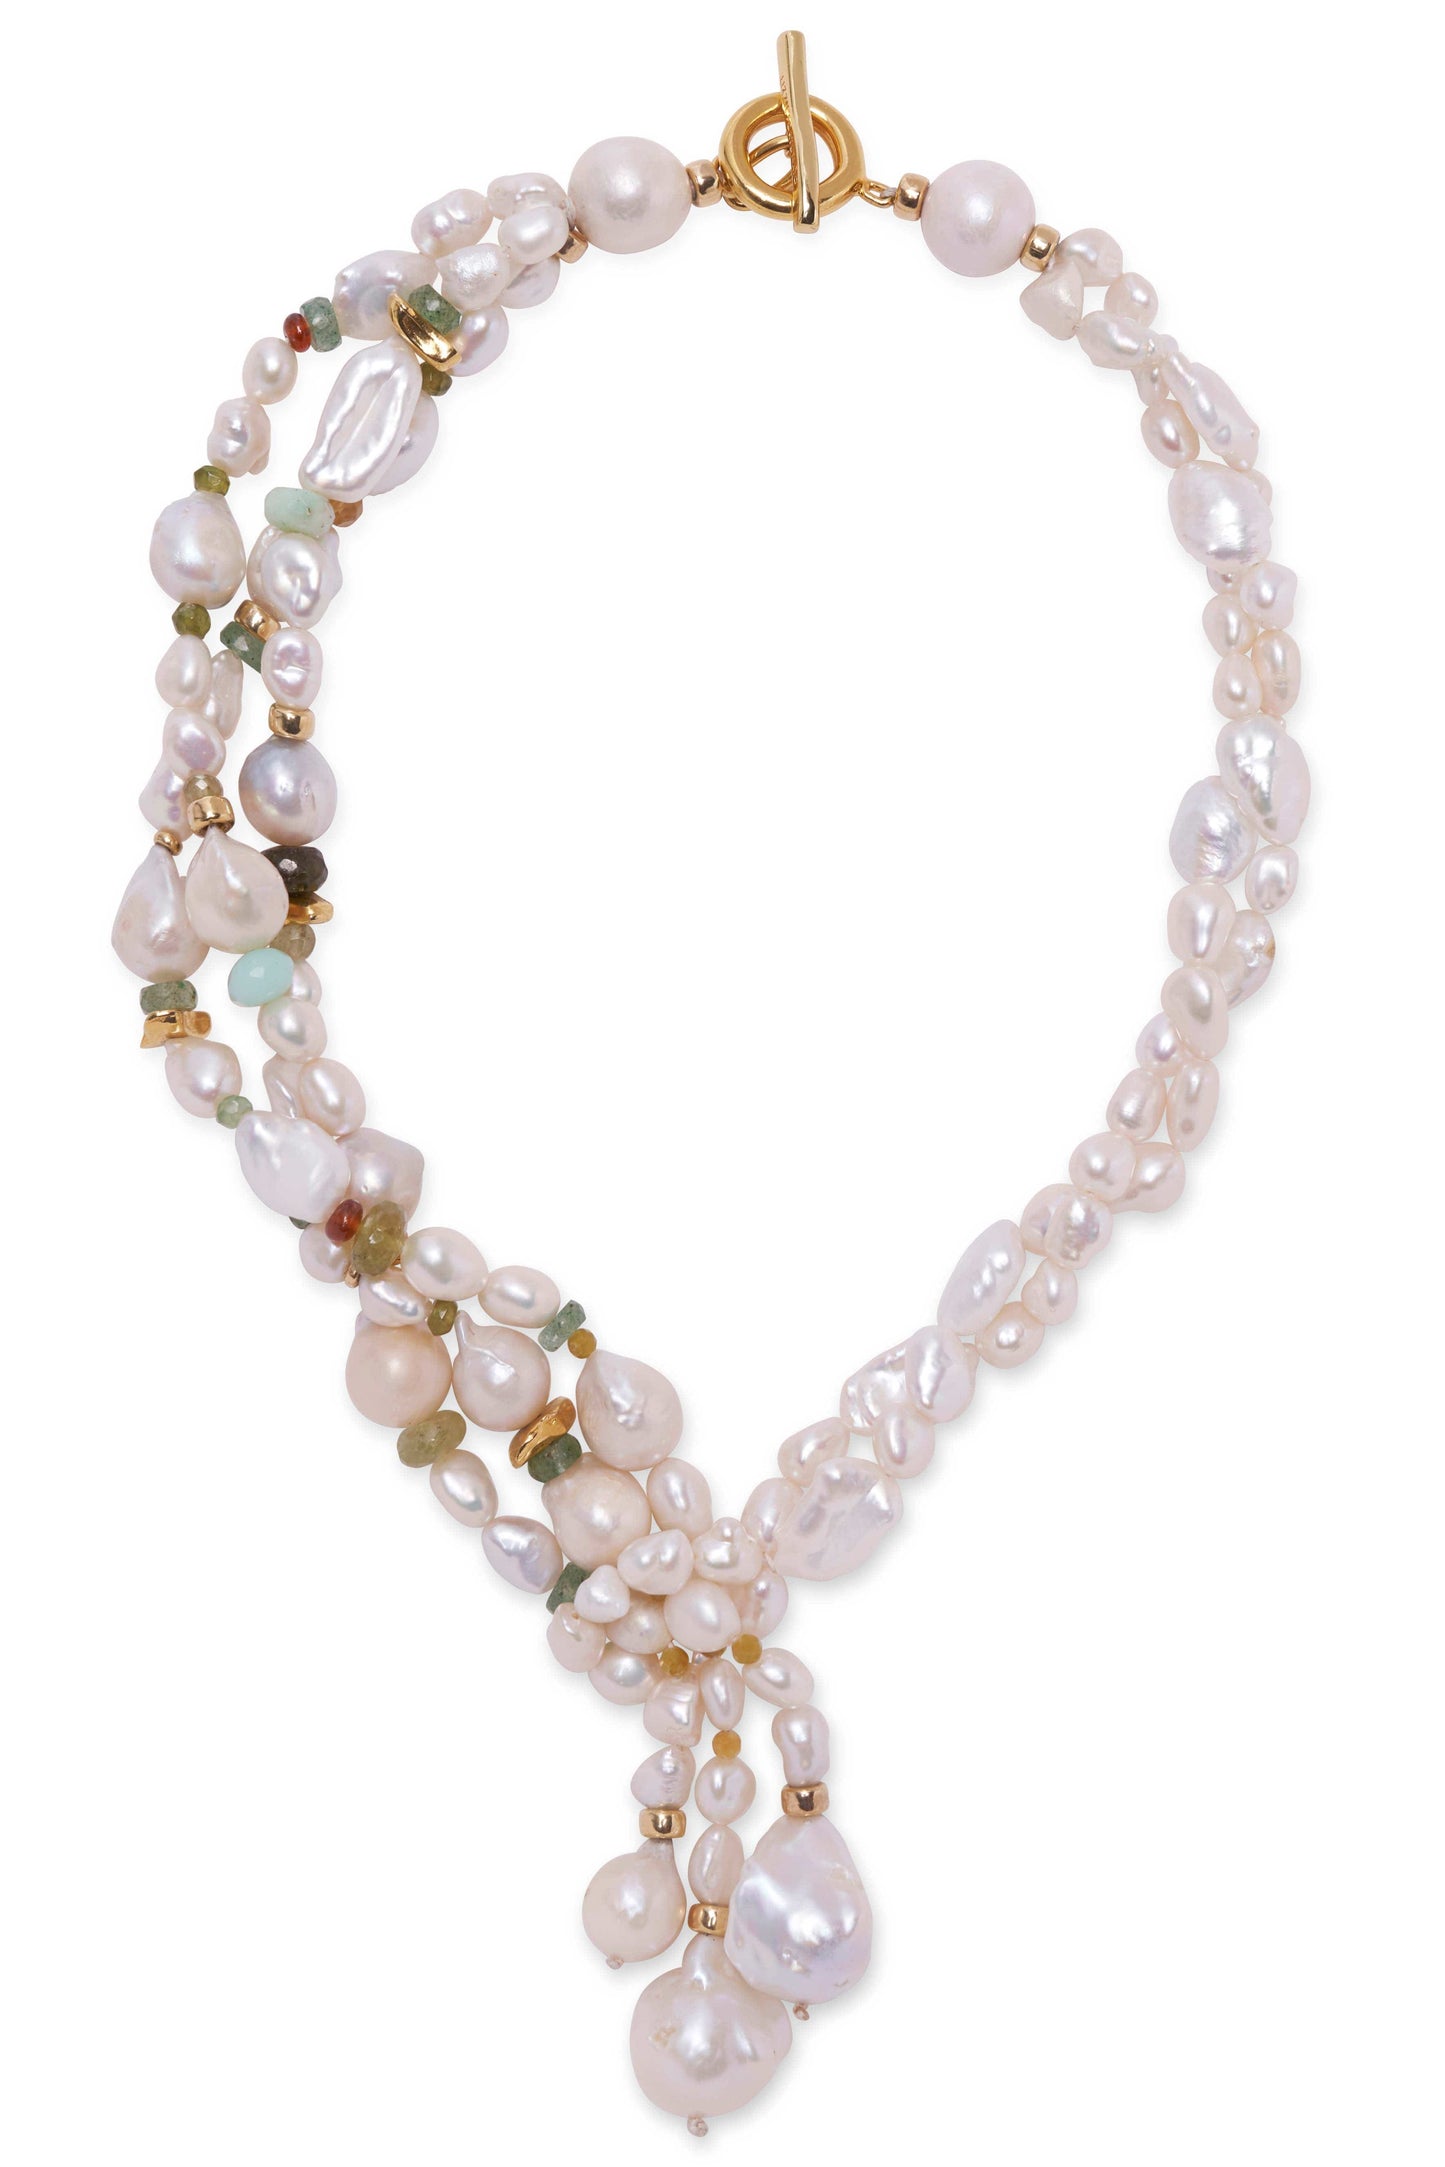 LIZZIE FORTUNATO-Falling Water Necklace-PEARL